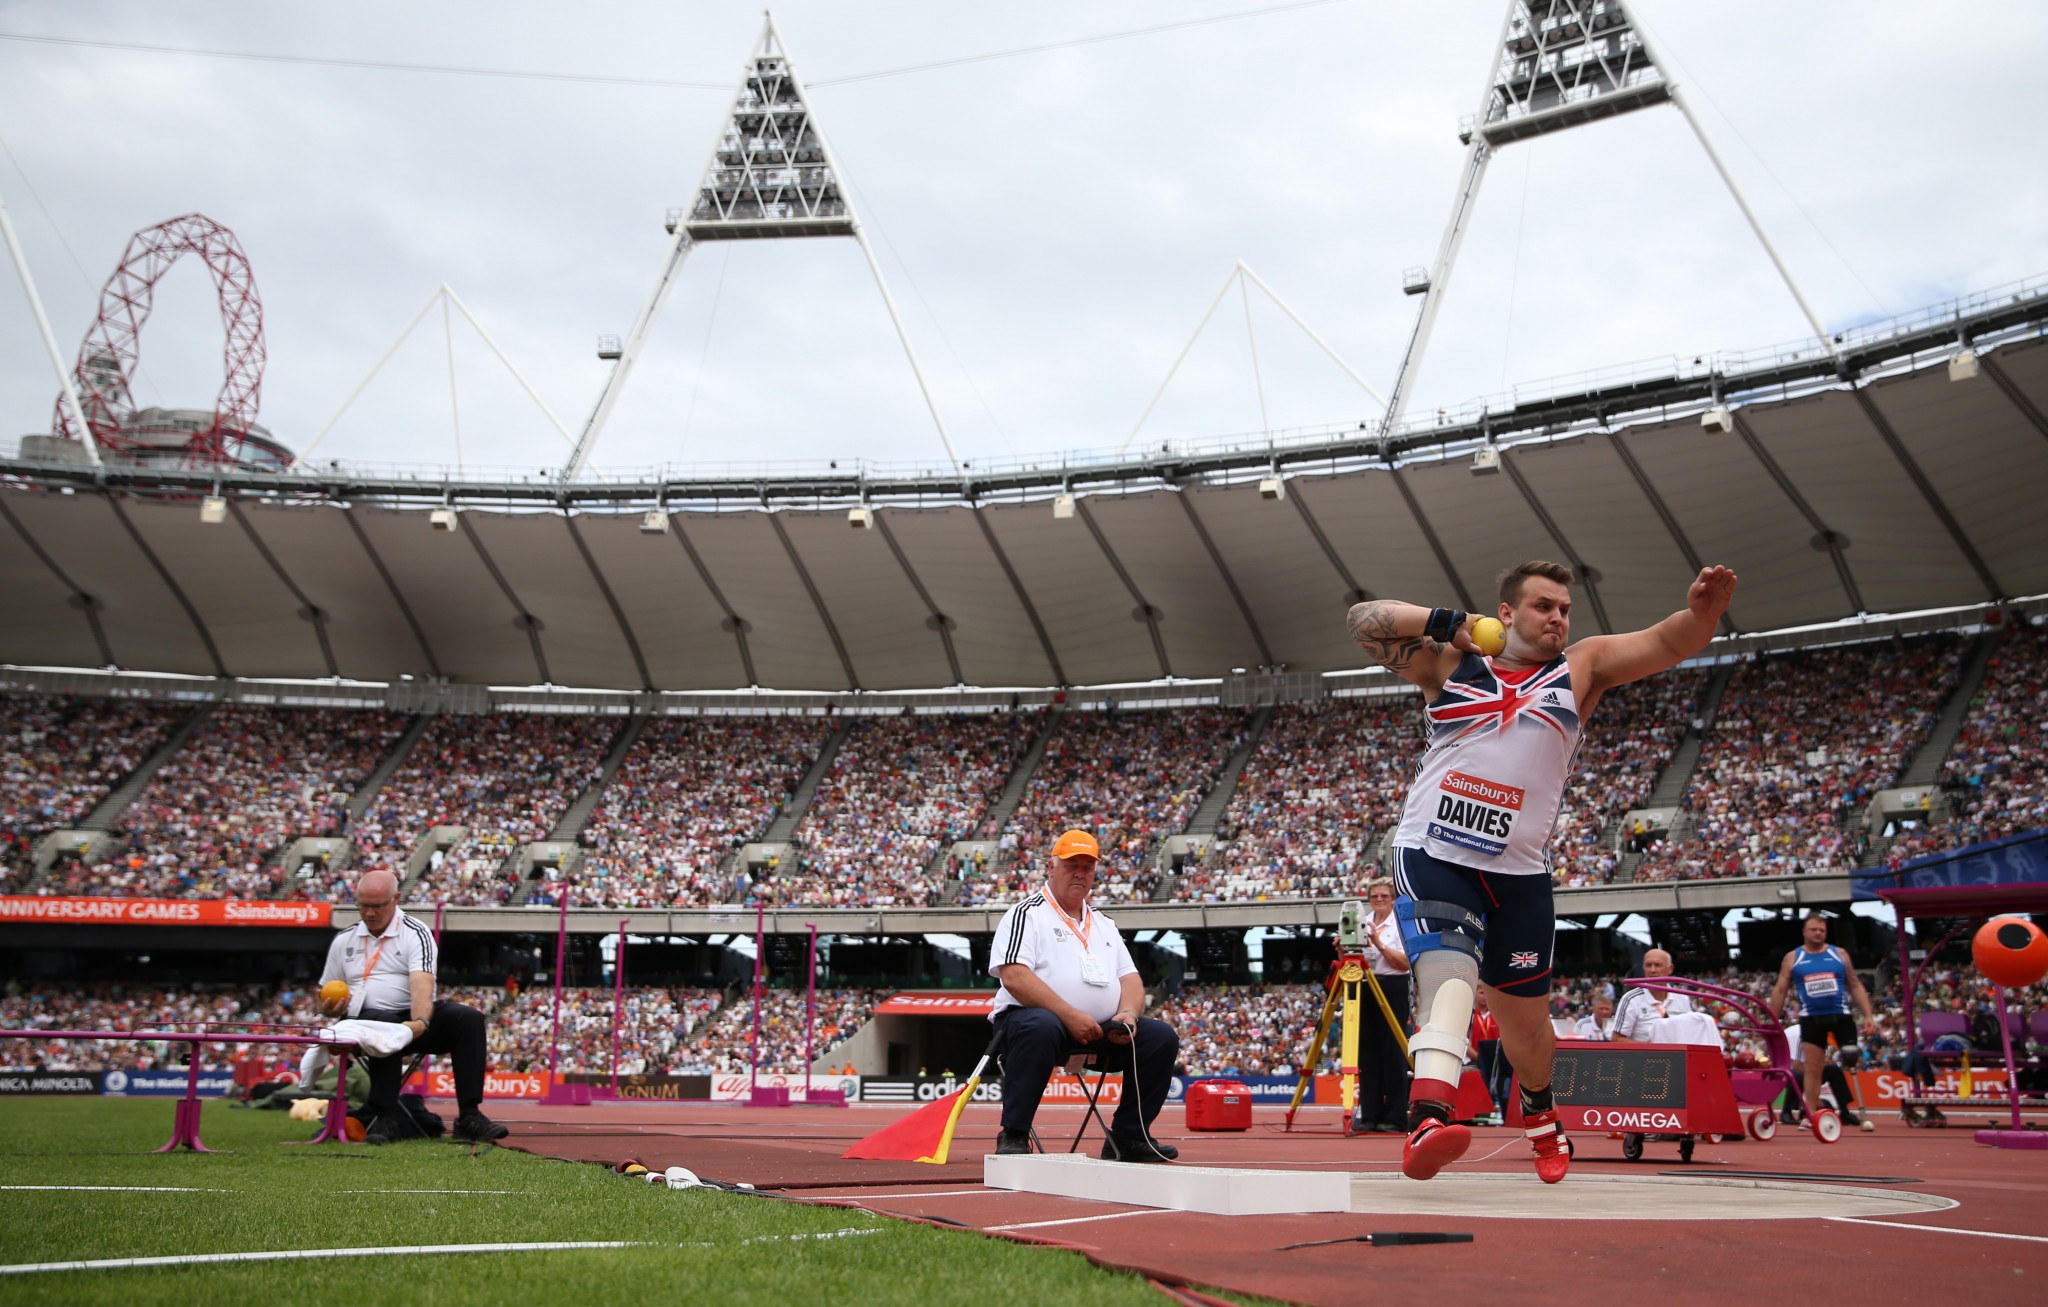 British Athletics has announced a sponsorship deal with Toyota for para sports at the 2019 Anniversary Games and Grand Prix Birmingham ©Getty Images